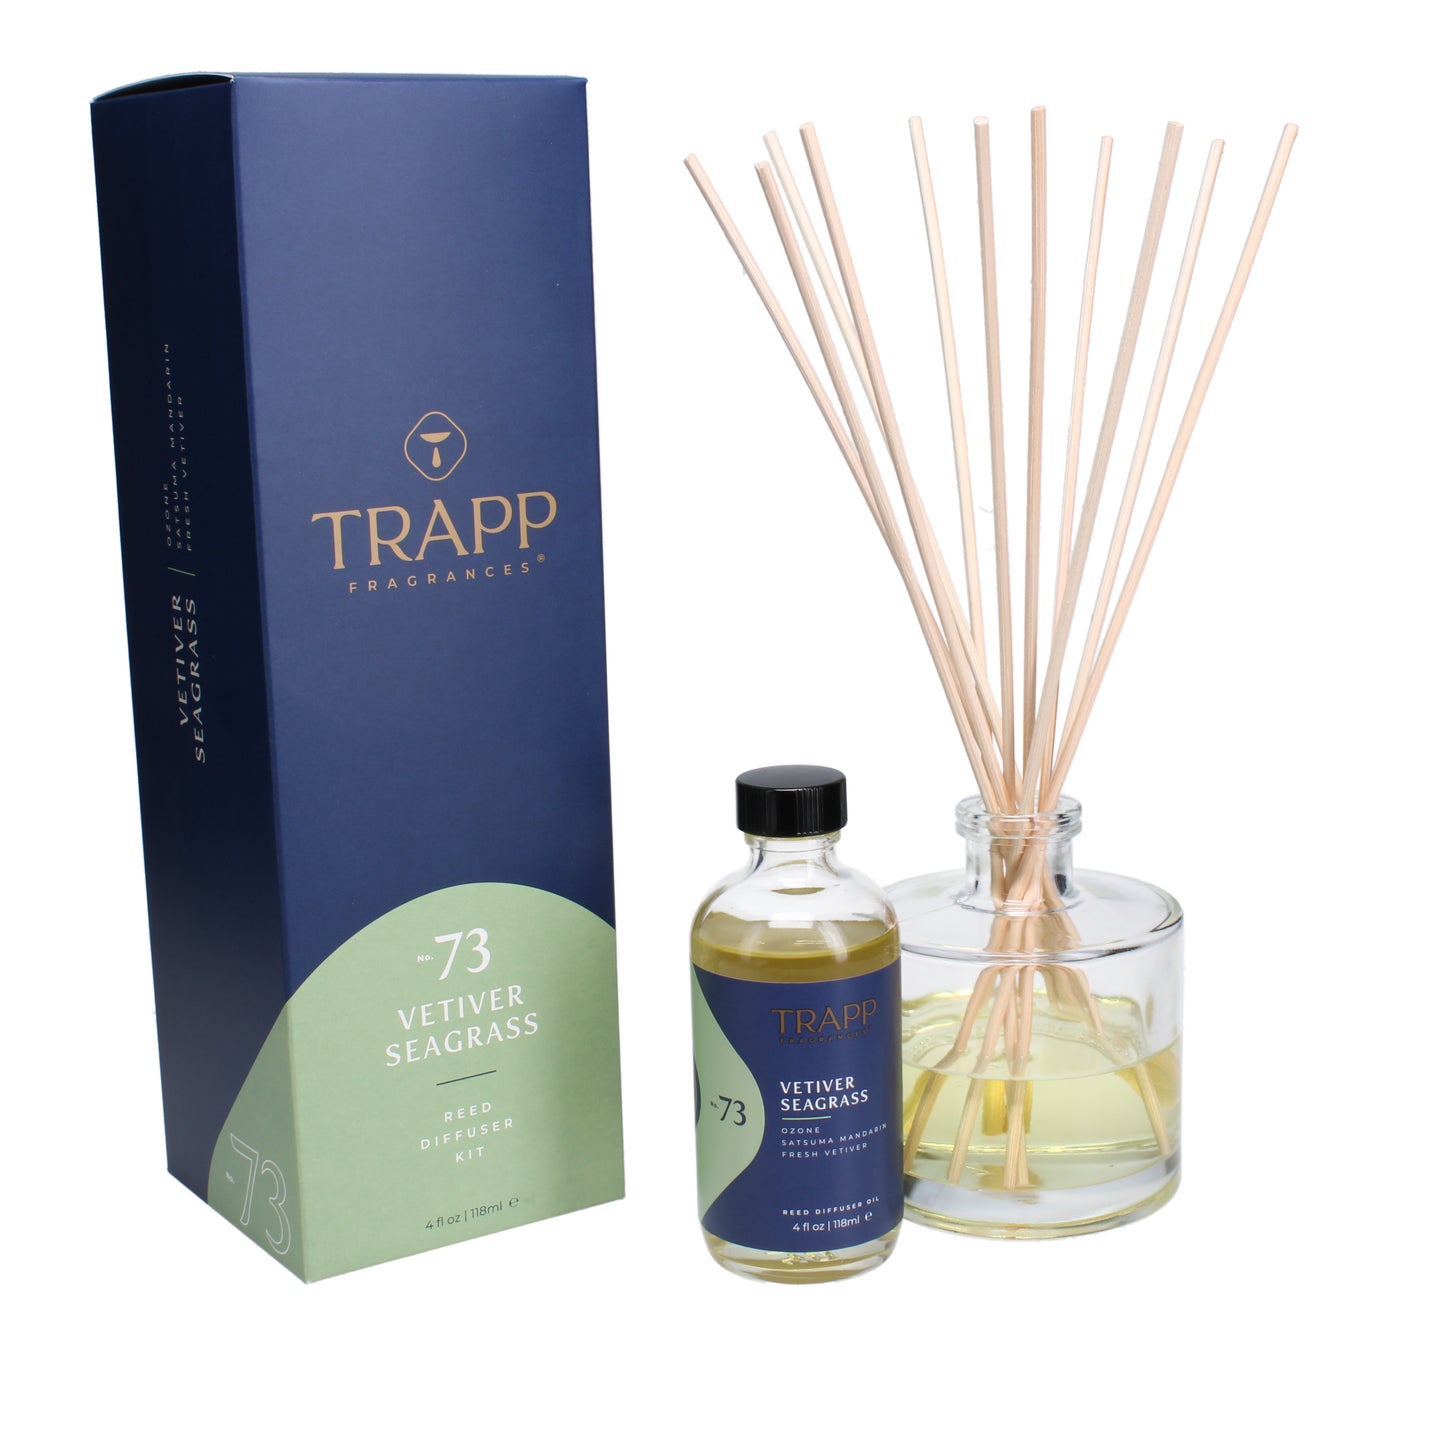 No. 73 Vetiver Seagrass 4 oz. Reed Diffuser Kit Image 2